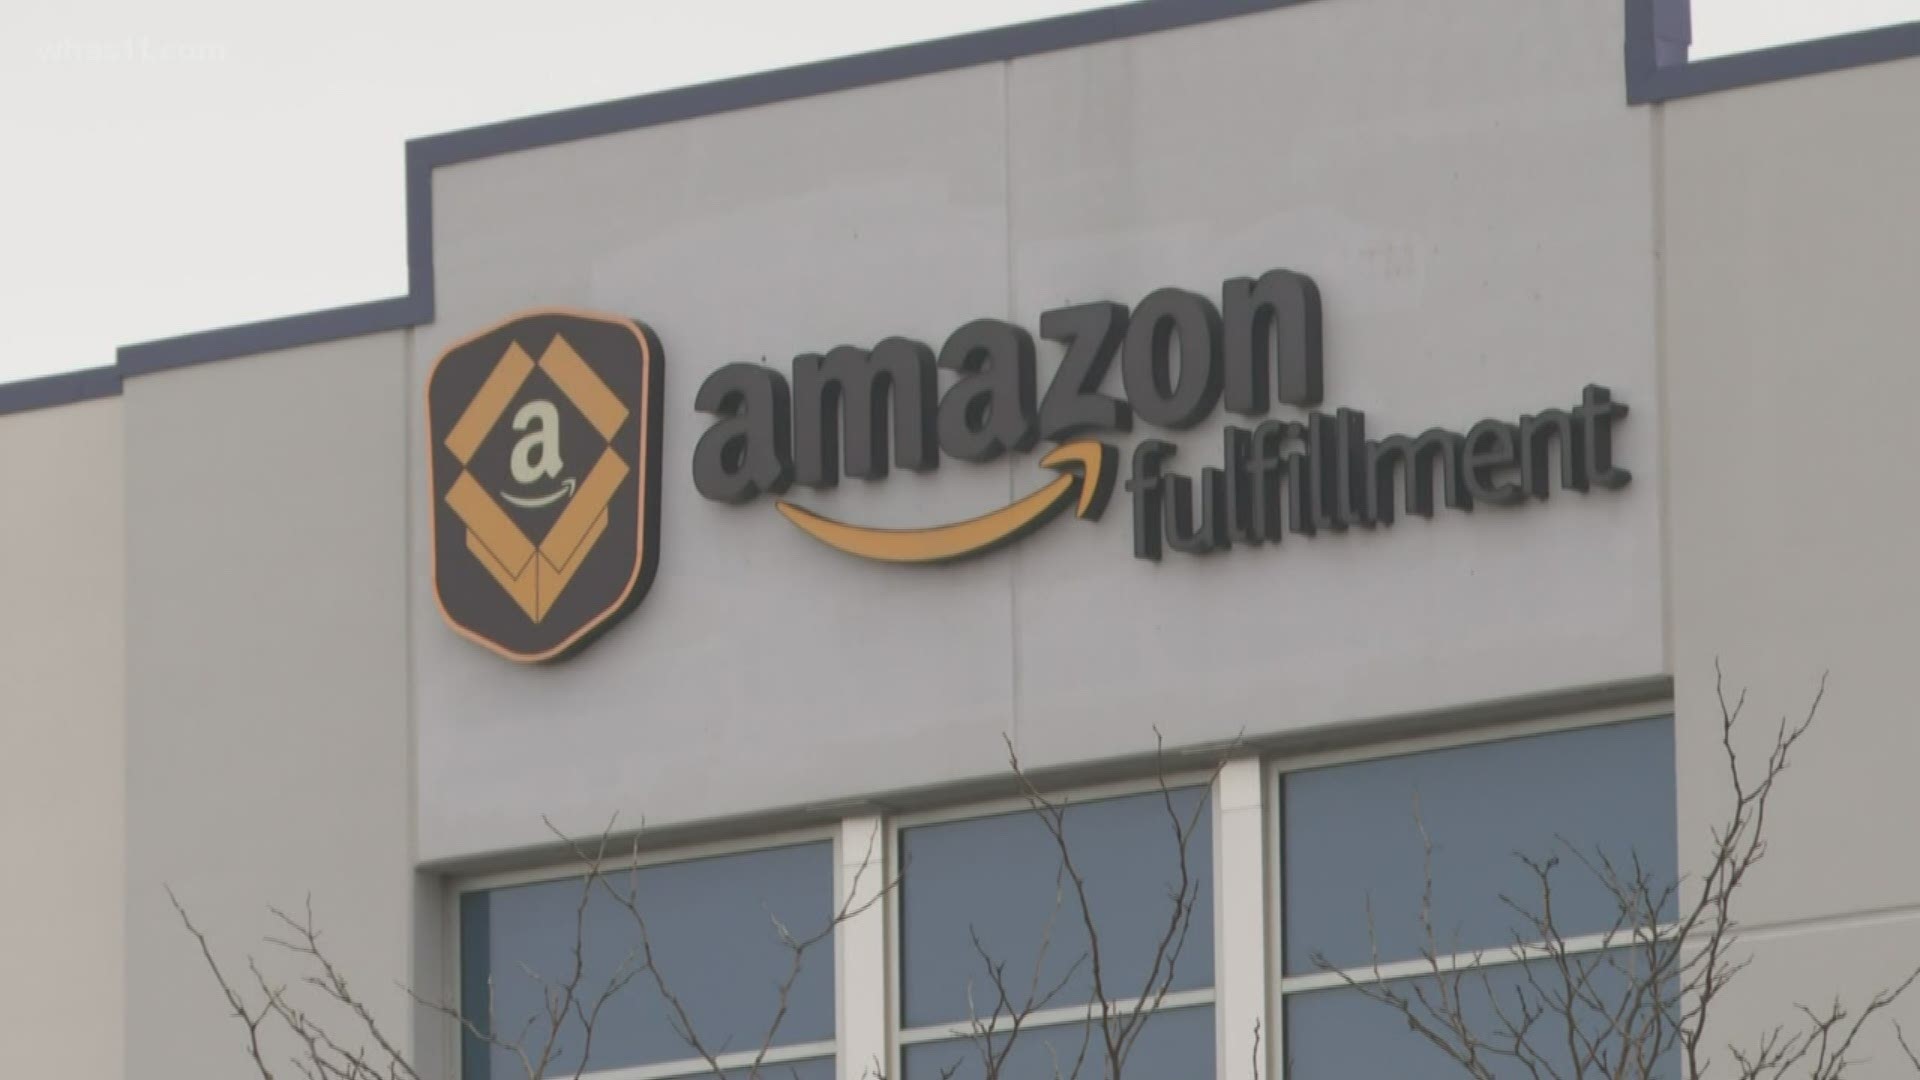 Amazon confirms they have temporarily shut down its Shepherdsville warehouse, with new safety protocols in place, after employees tested positive for COVID-19.